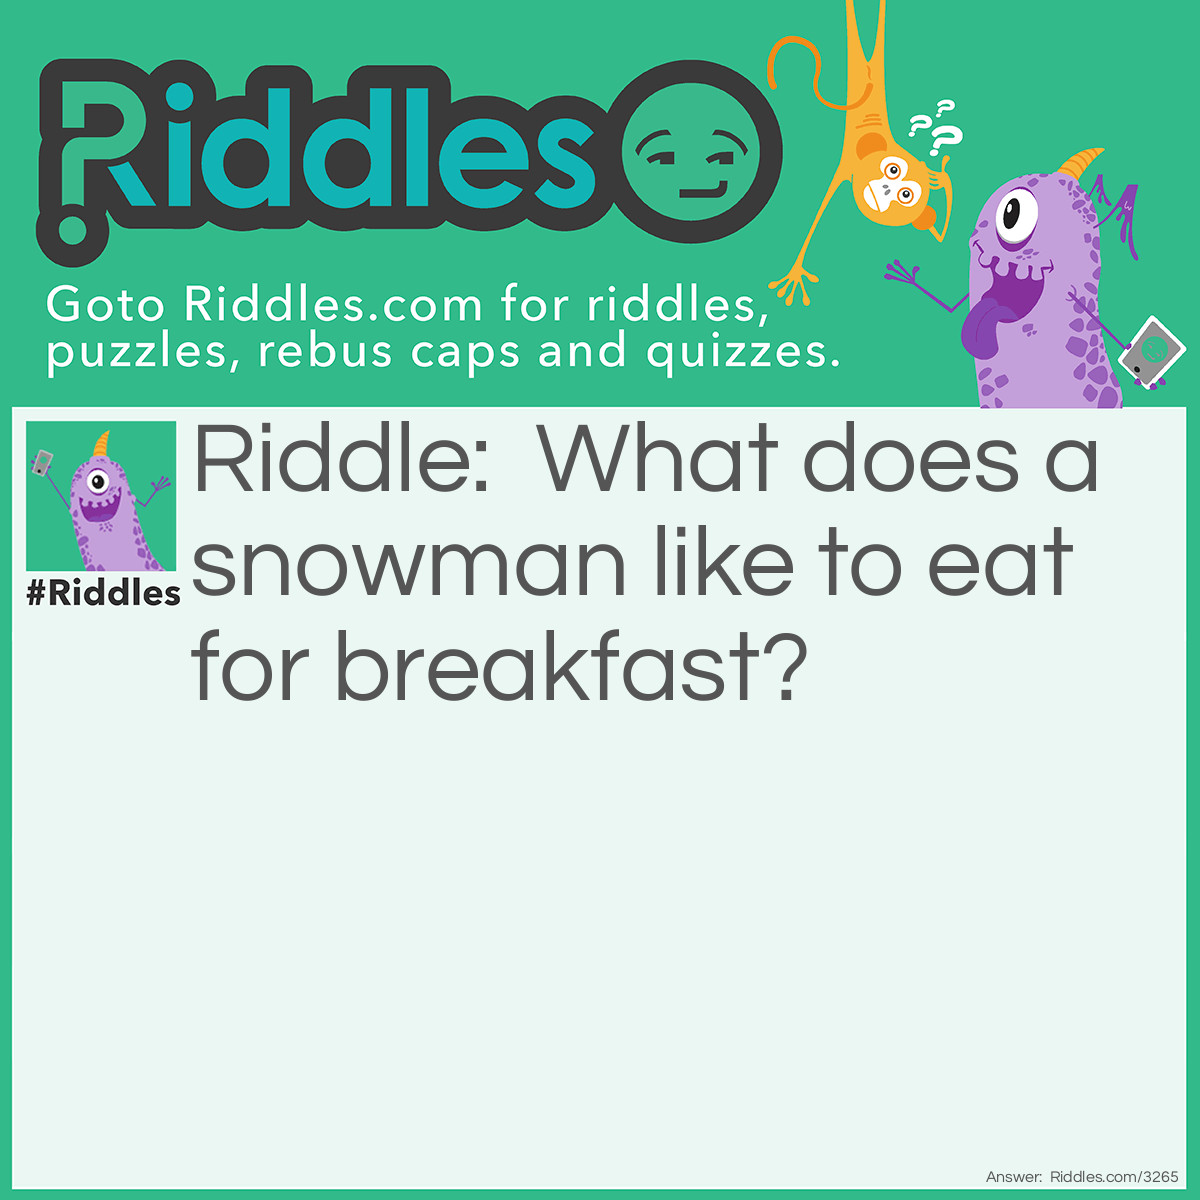 Riddle: What does a snowman like to eat for breakfast? Answer: Frosted Flakes.